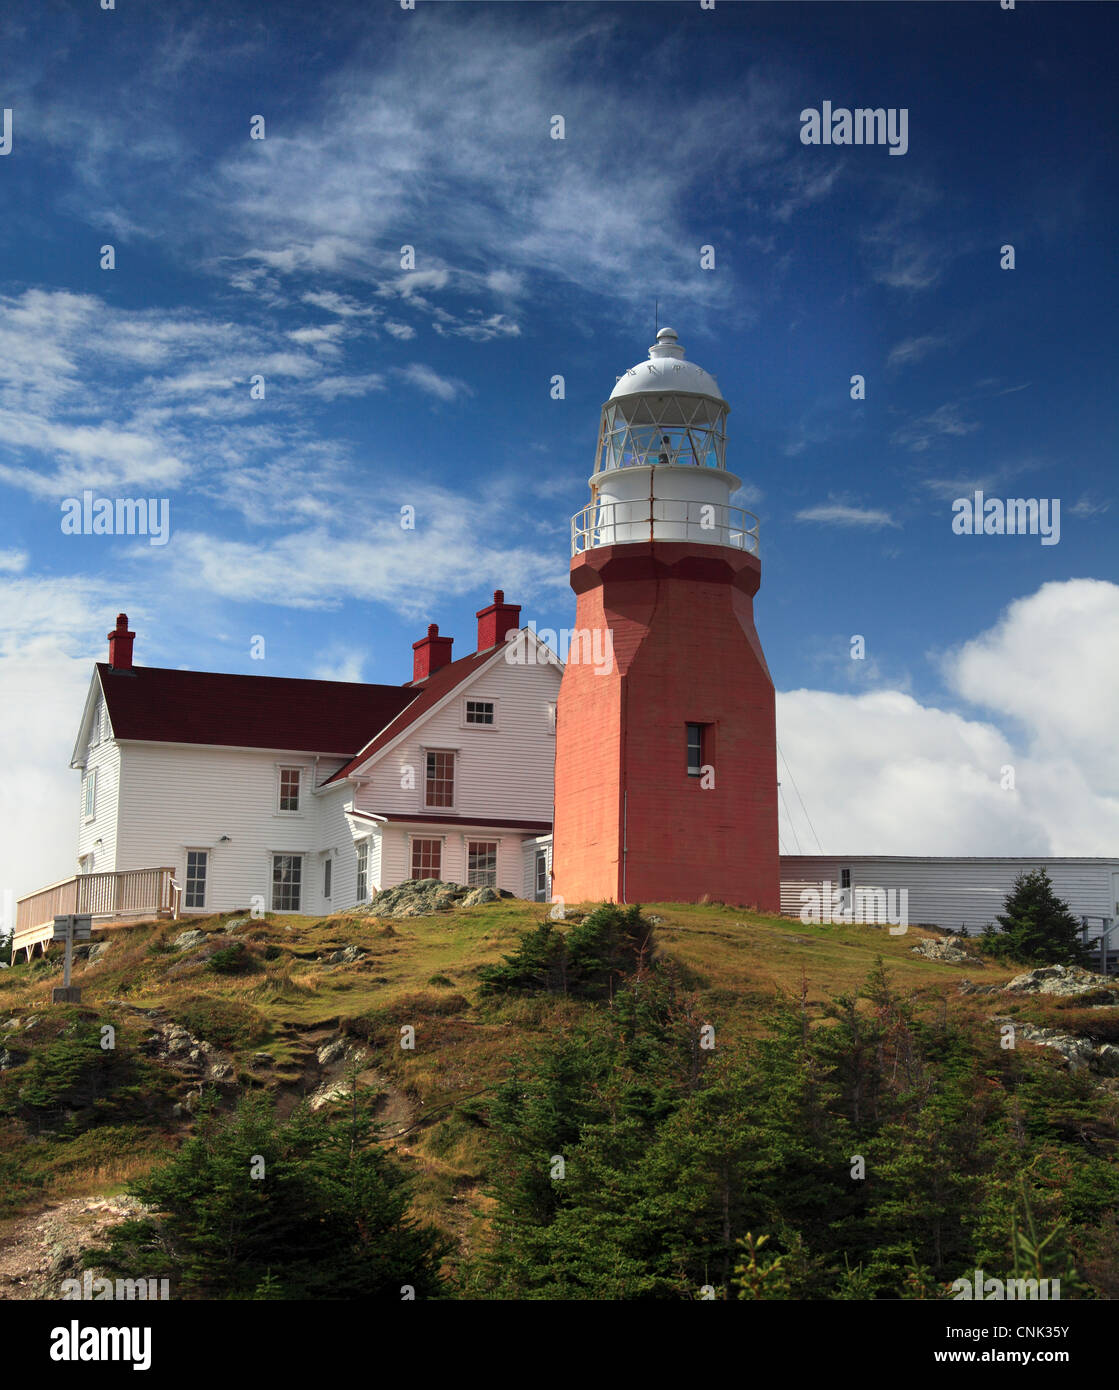 Photo of the Long Point Lighthouse, located on Devil's Cove Head, North Twillingate Island, Newfoundland, Canada Stock Photo